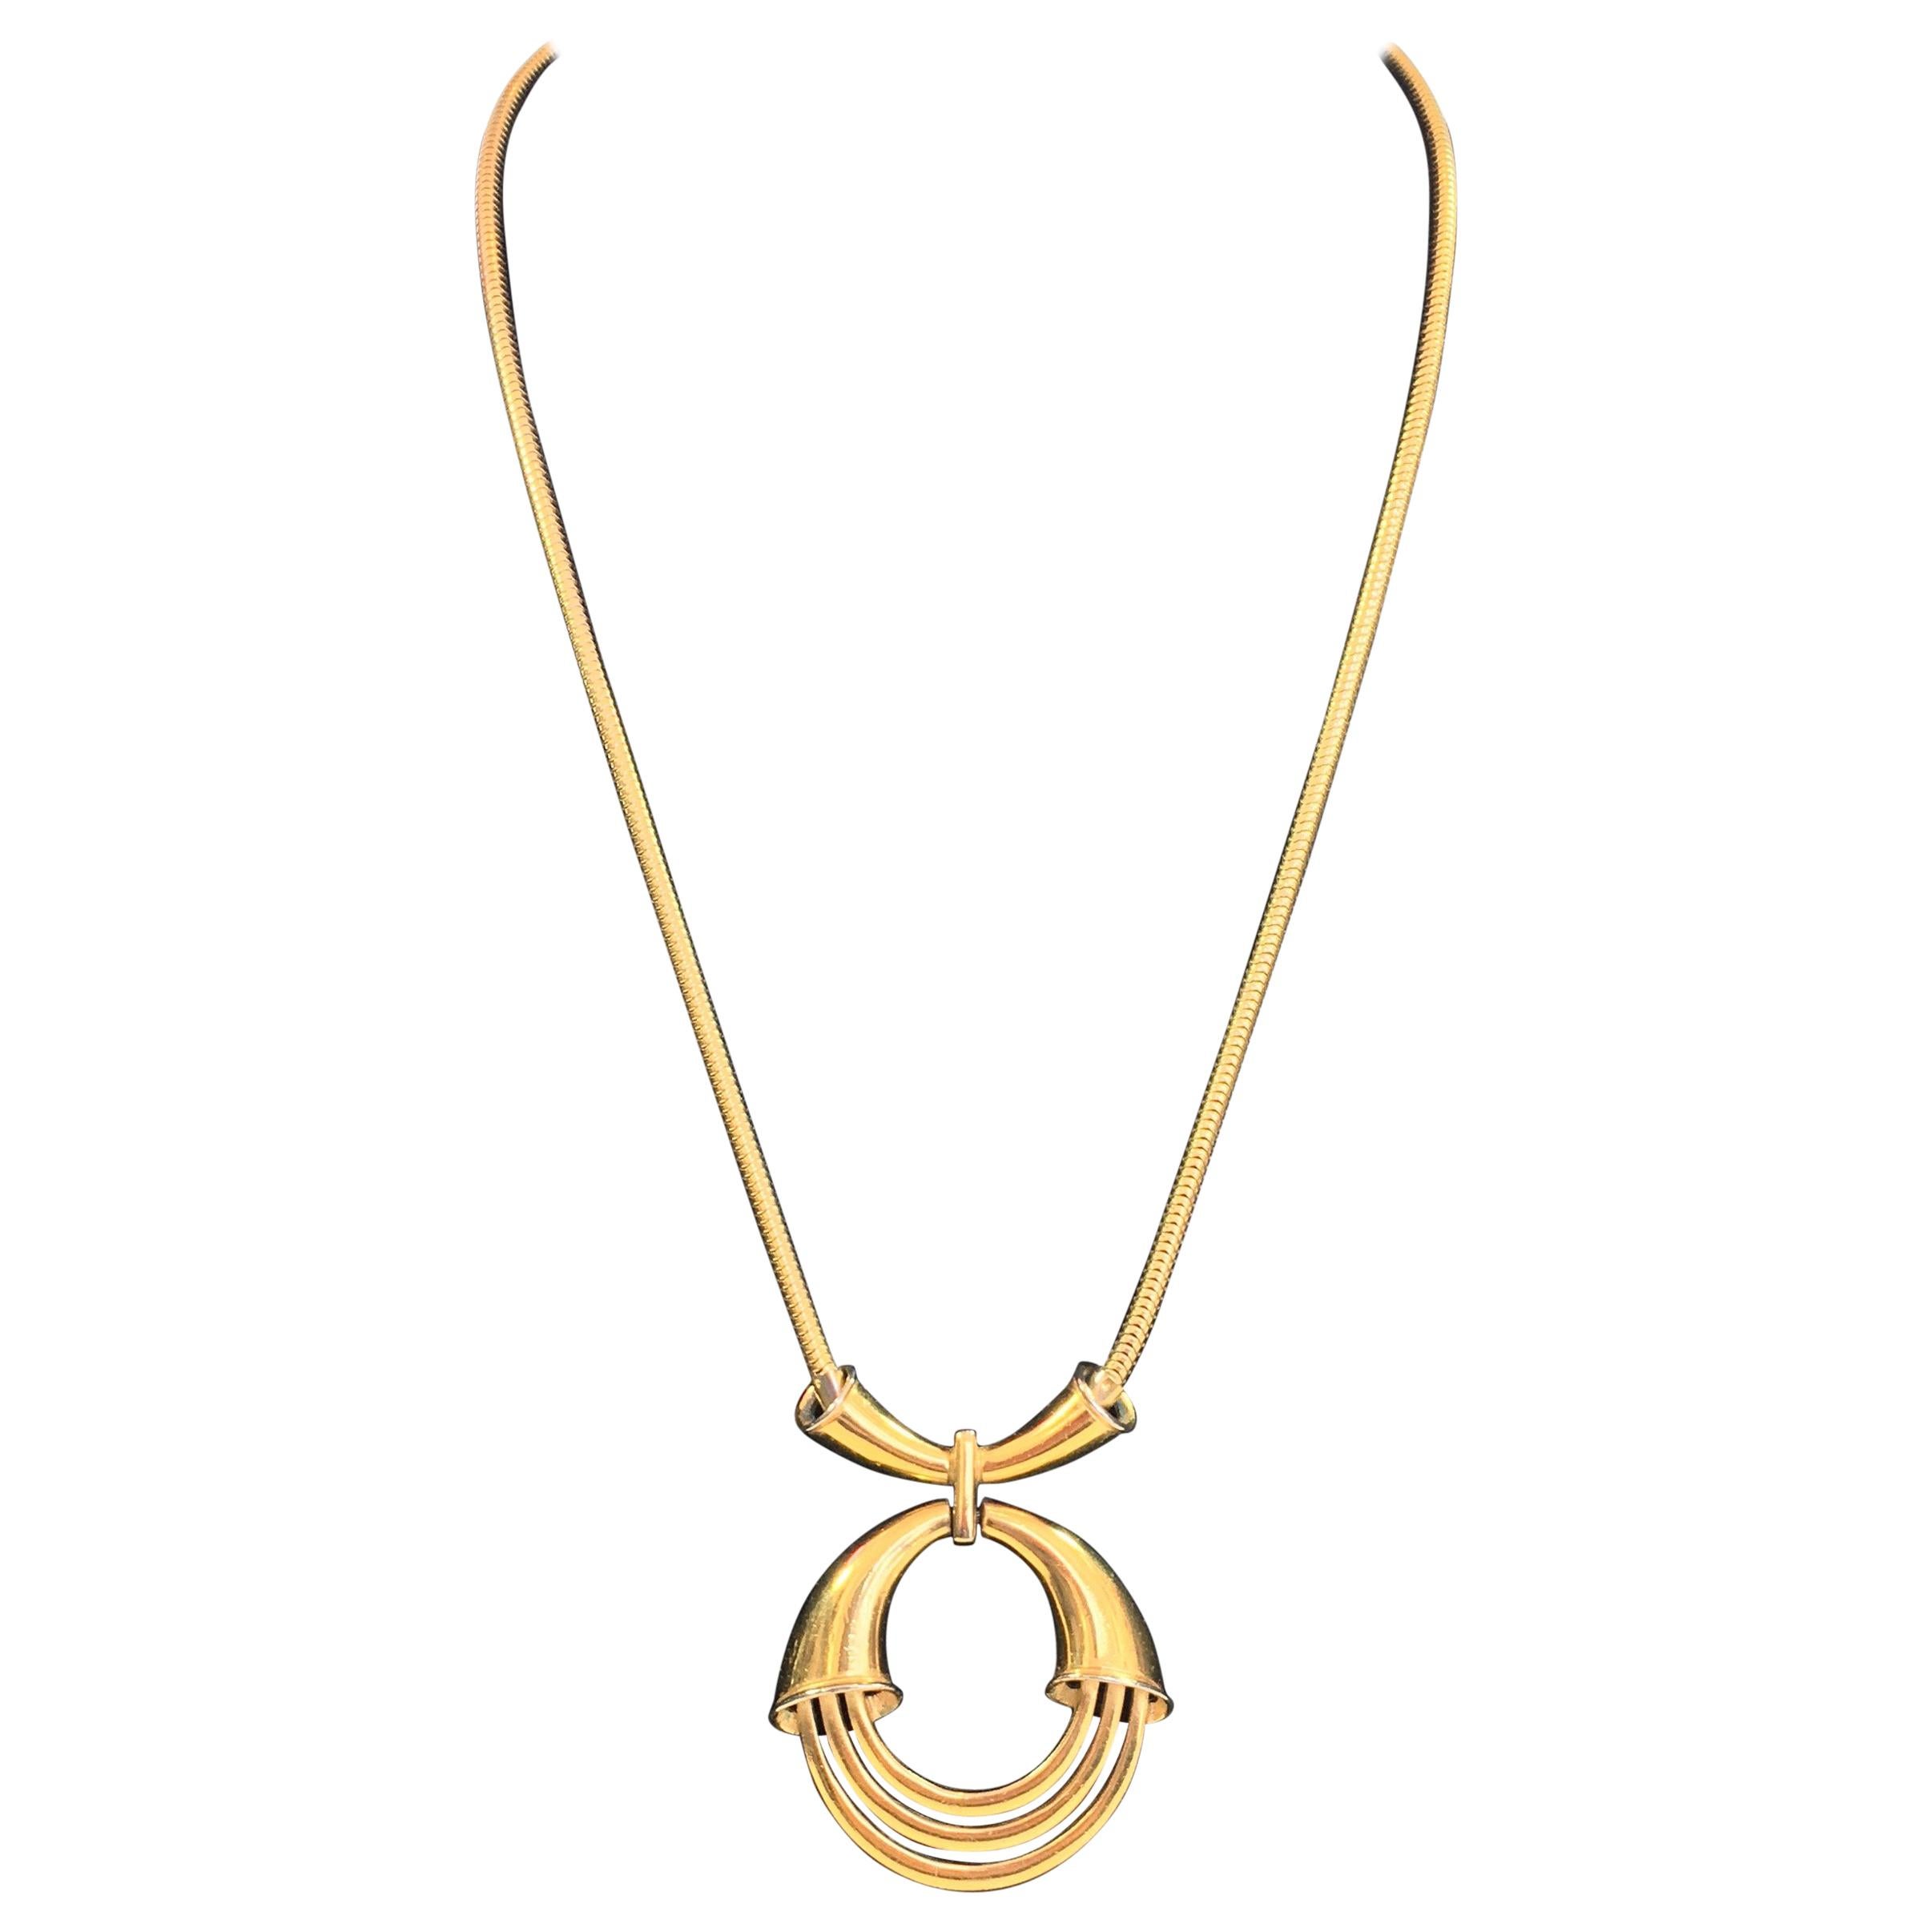 Trifari Circular Design Gold Tone Necklace with Round Snake Chain For Sale